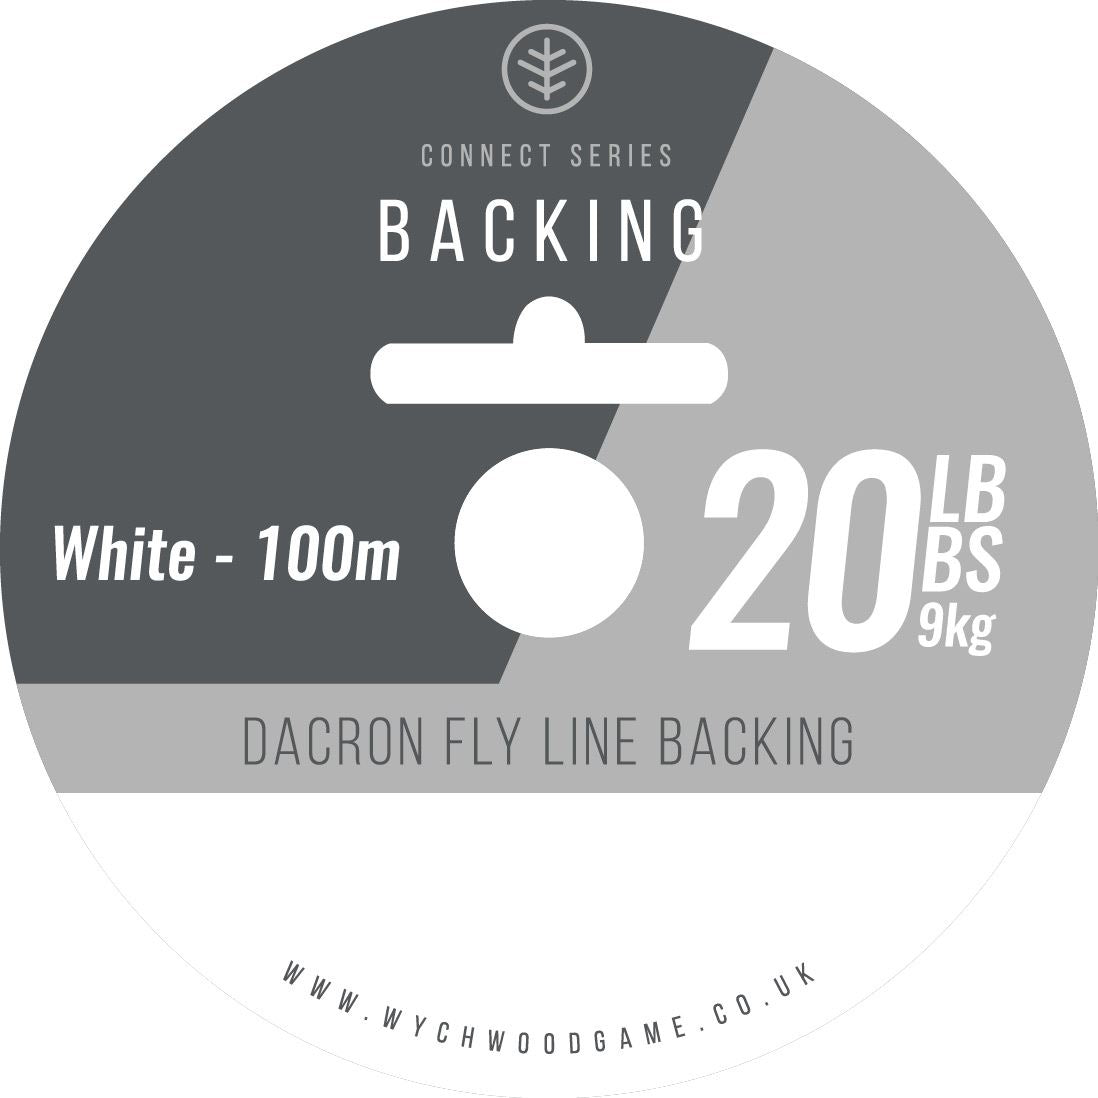 Wychwood Connect Series Backing Line 20LB White 1000m